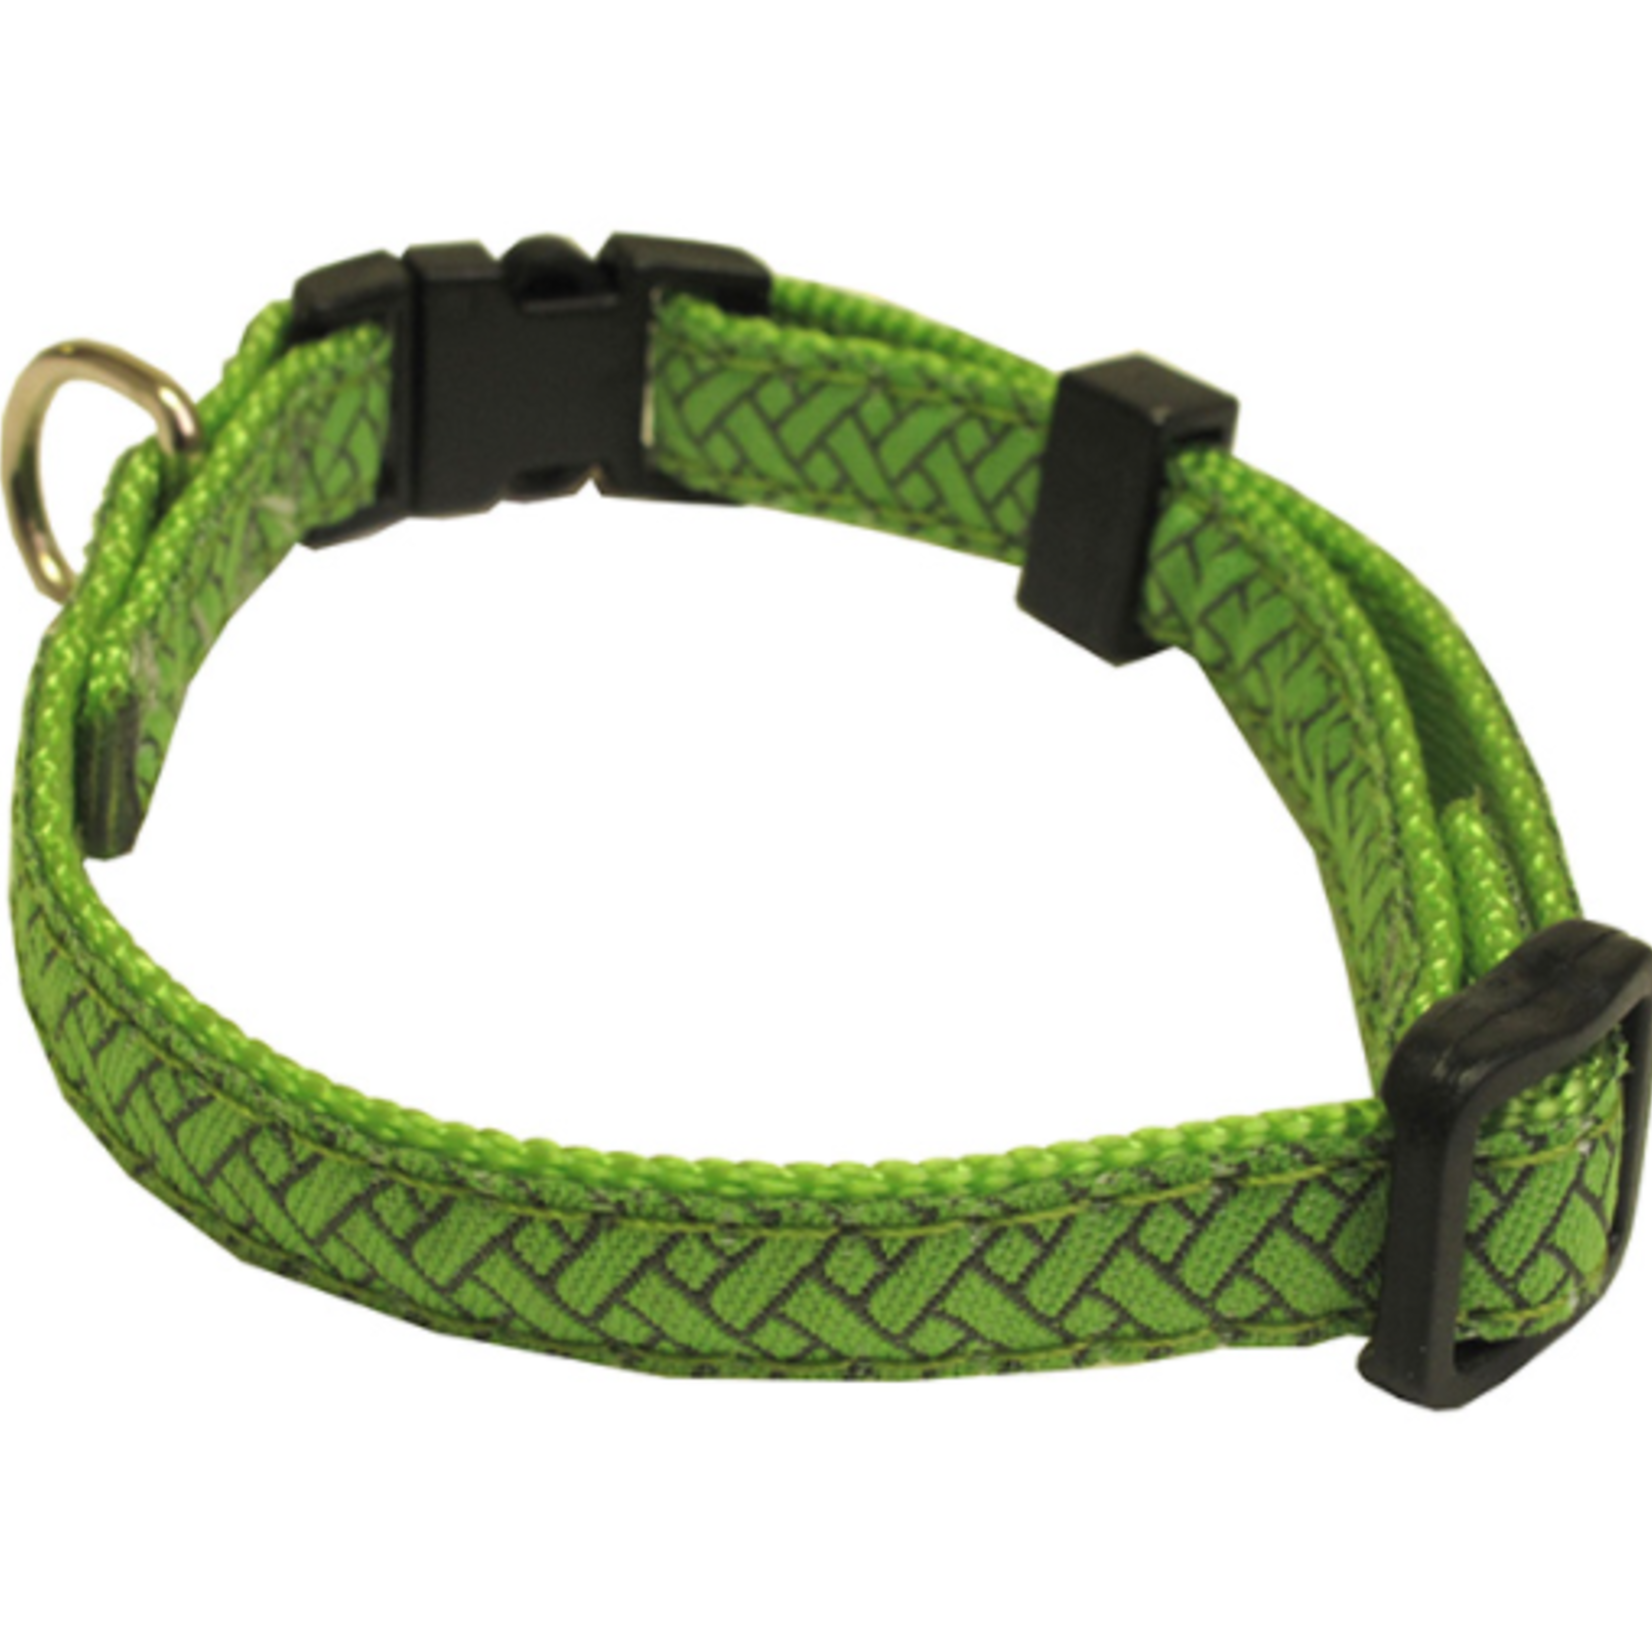 Hunter Brand Security Adjustable collar - from 8 to 11 in - Green Lattice